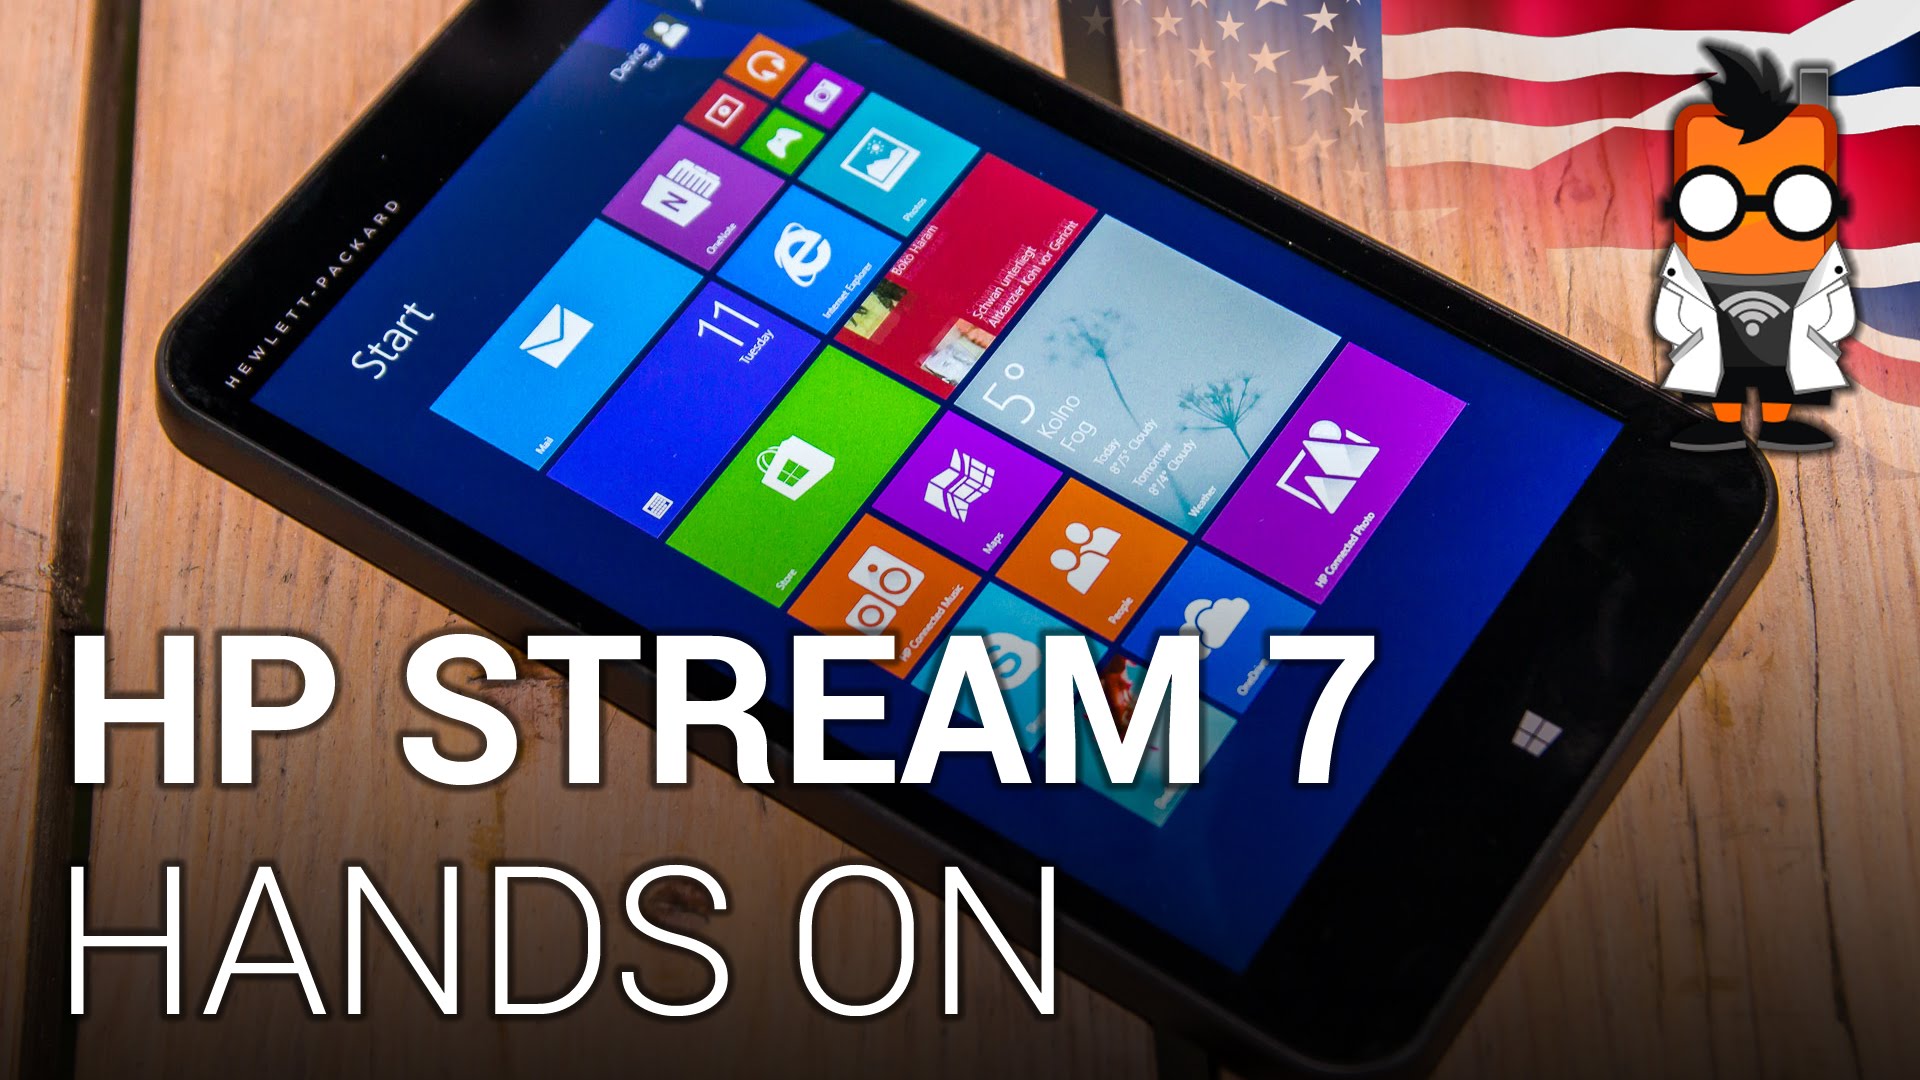 HP Stream 7 - 99 dollar tablet with Windows 8.1 - Hands on [ENGLISH ...